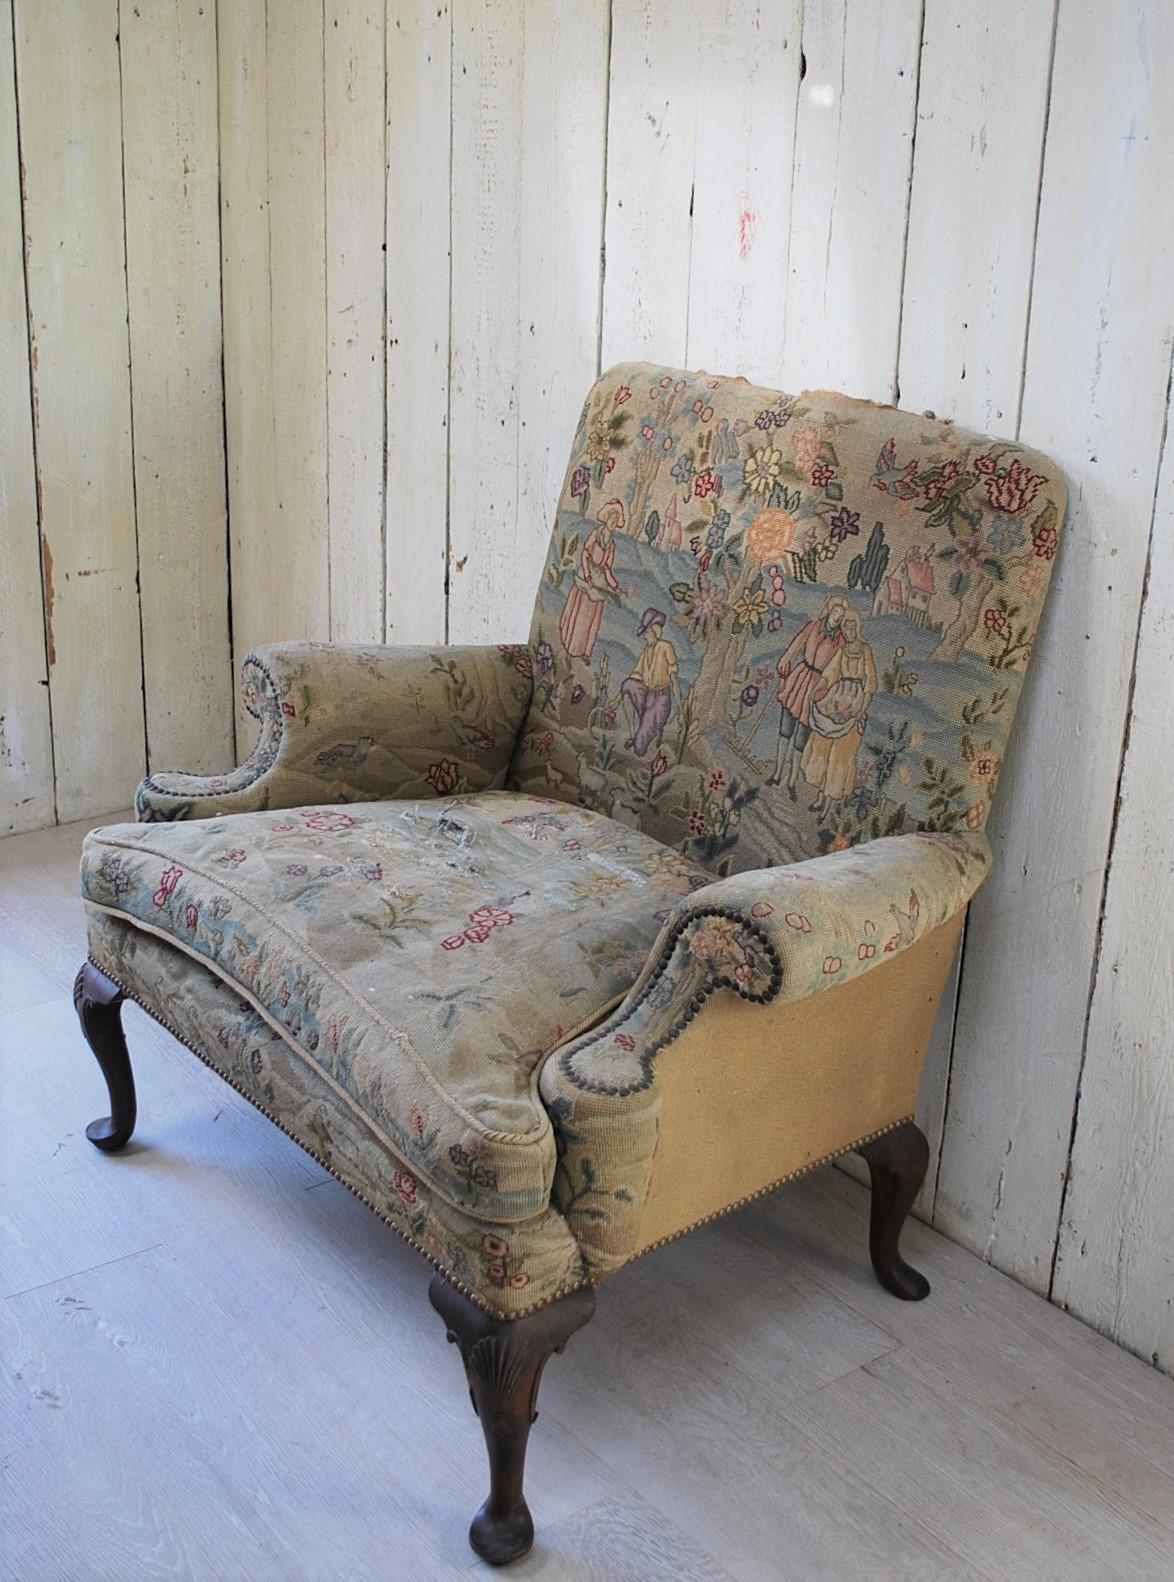 A rare and unusual oversized Queen Anne style wing chair, with an old worn tapestry. A real country house statement piece, that looks very authentic. Extremely rare to find a good copy that is true to the original design with good lines. Standing on